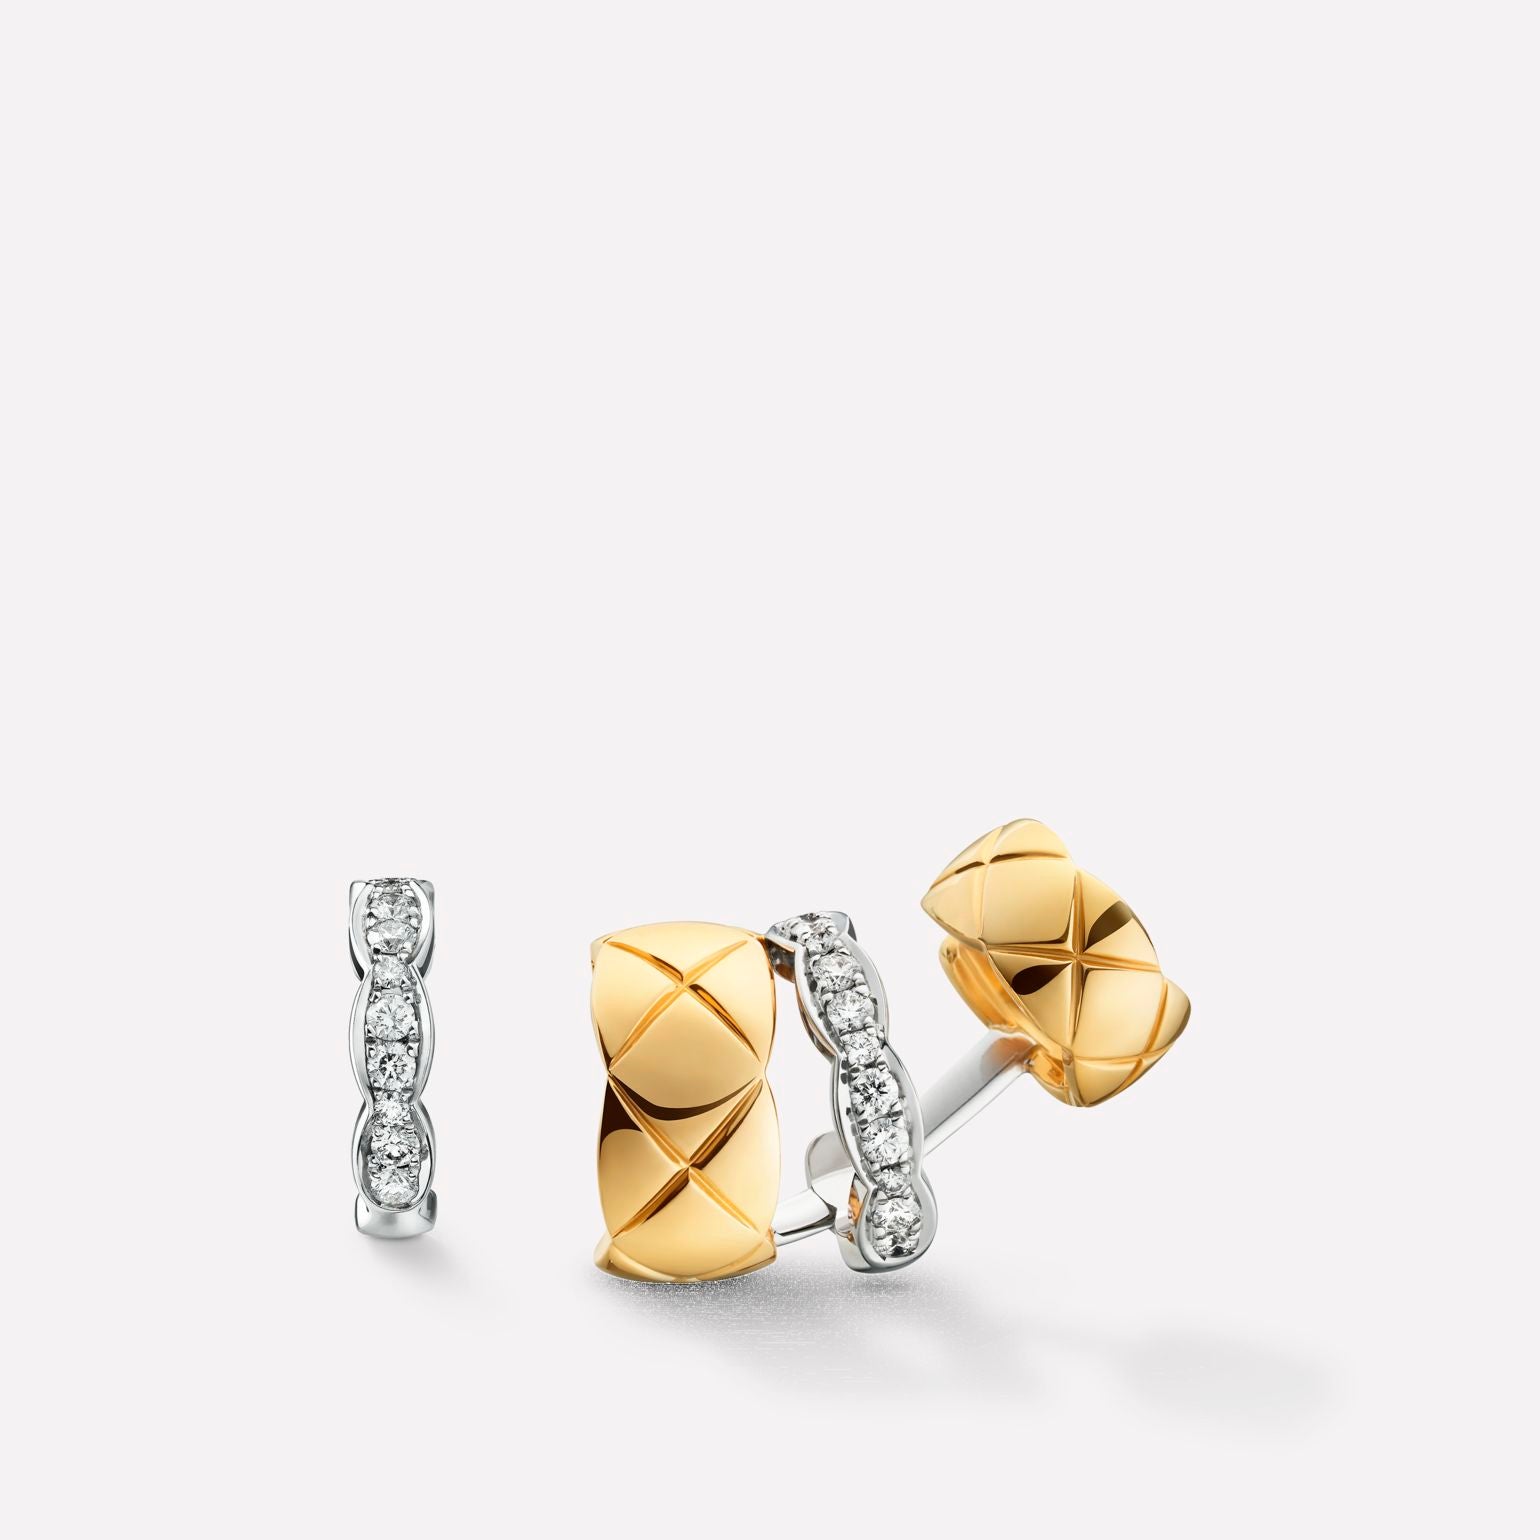 Coco Quilted Motif Earrings with CZ, White and Yellow Gold